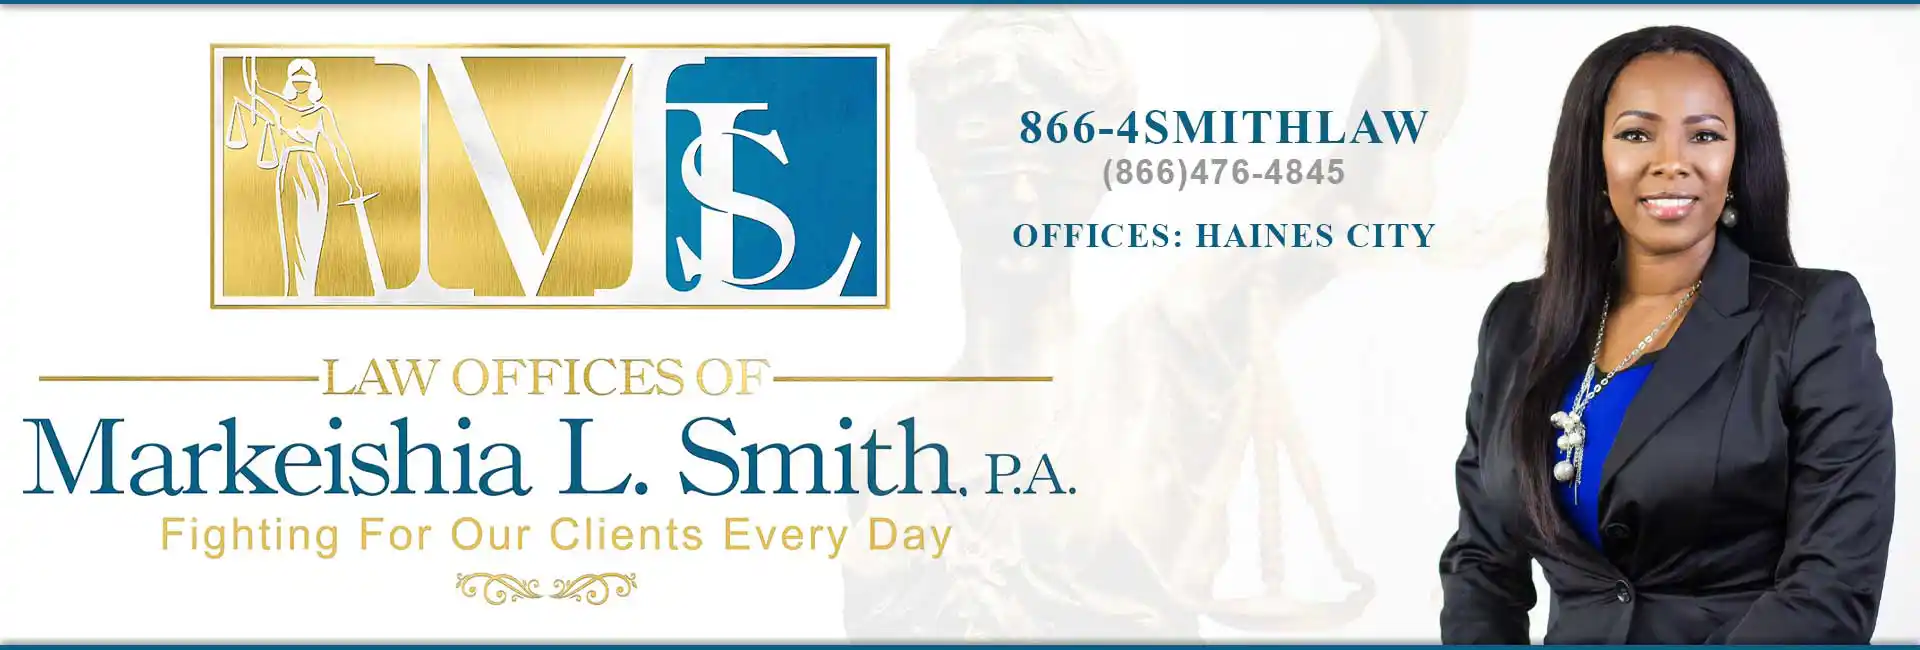 Law Offices of Markeishia L. Smith, P.A.